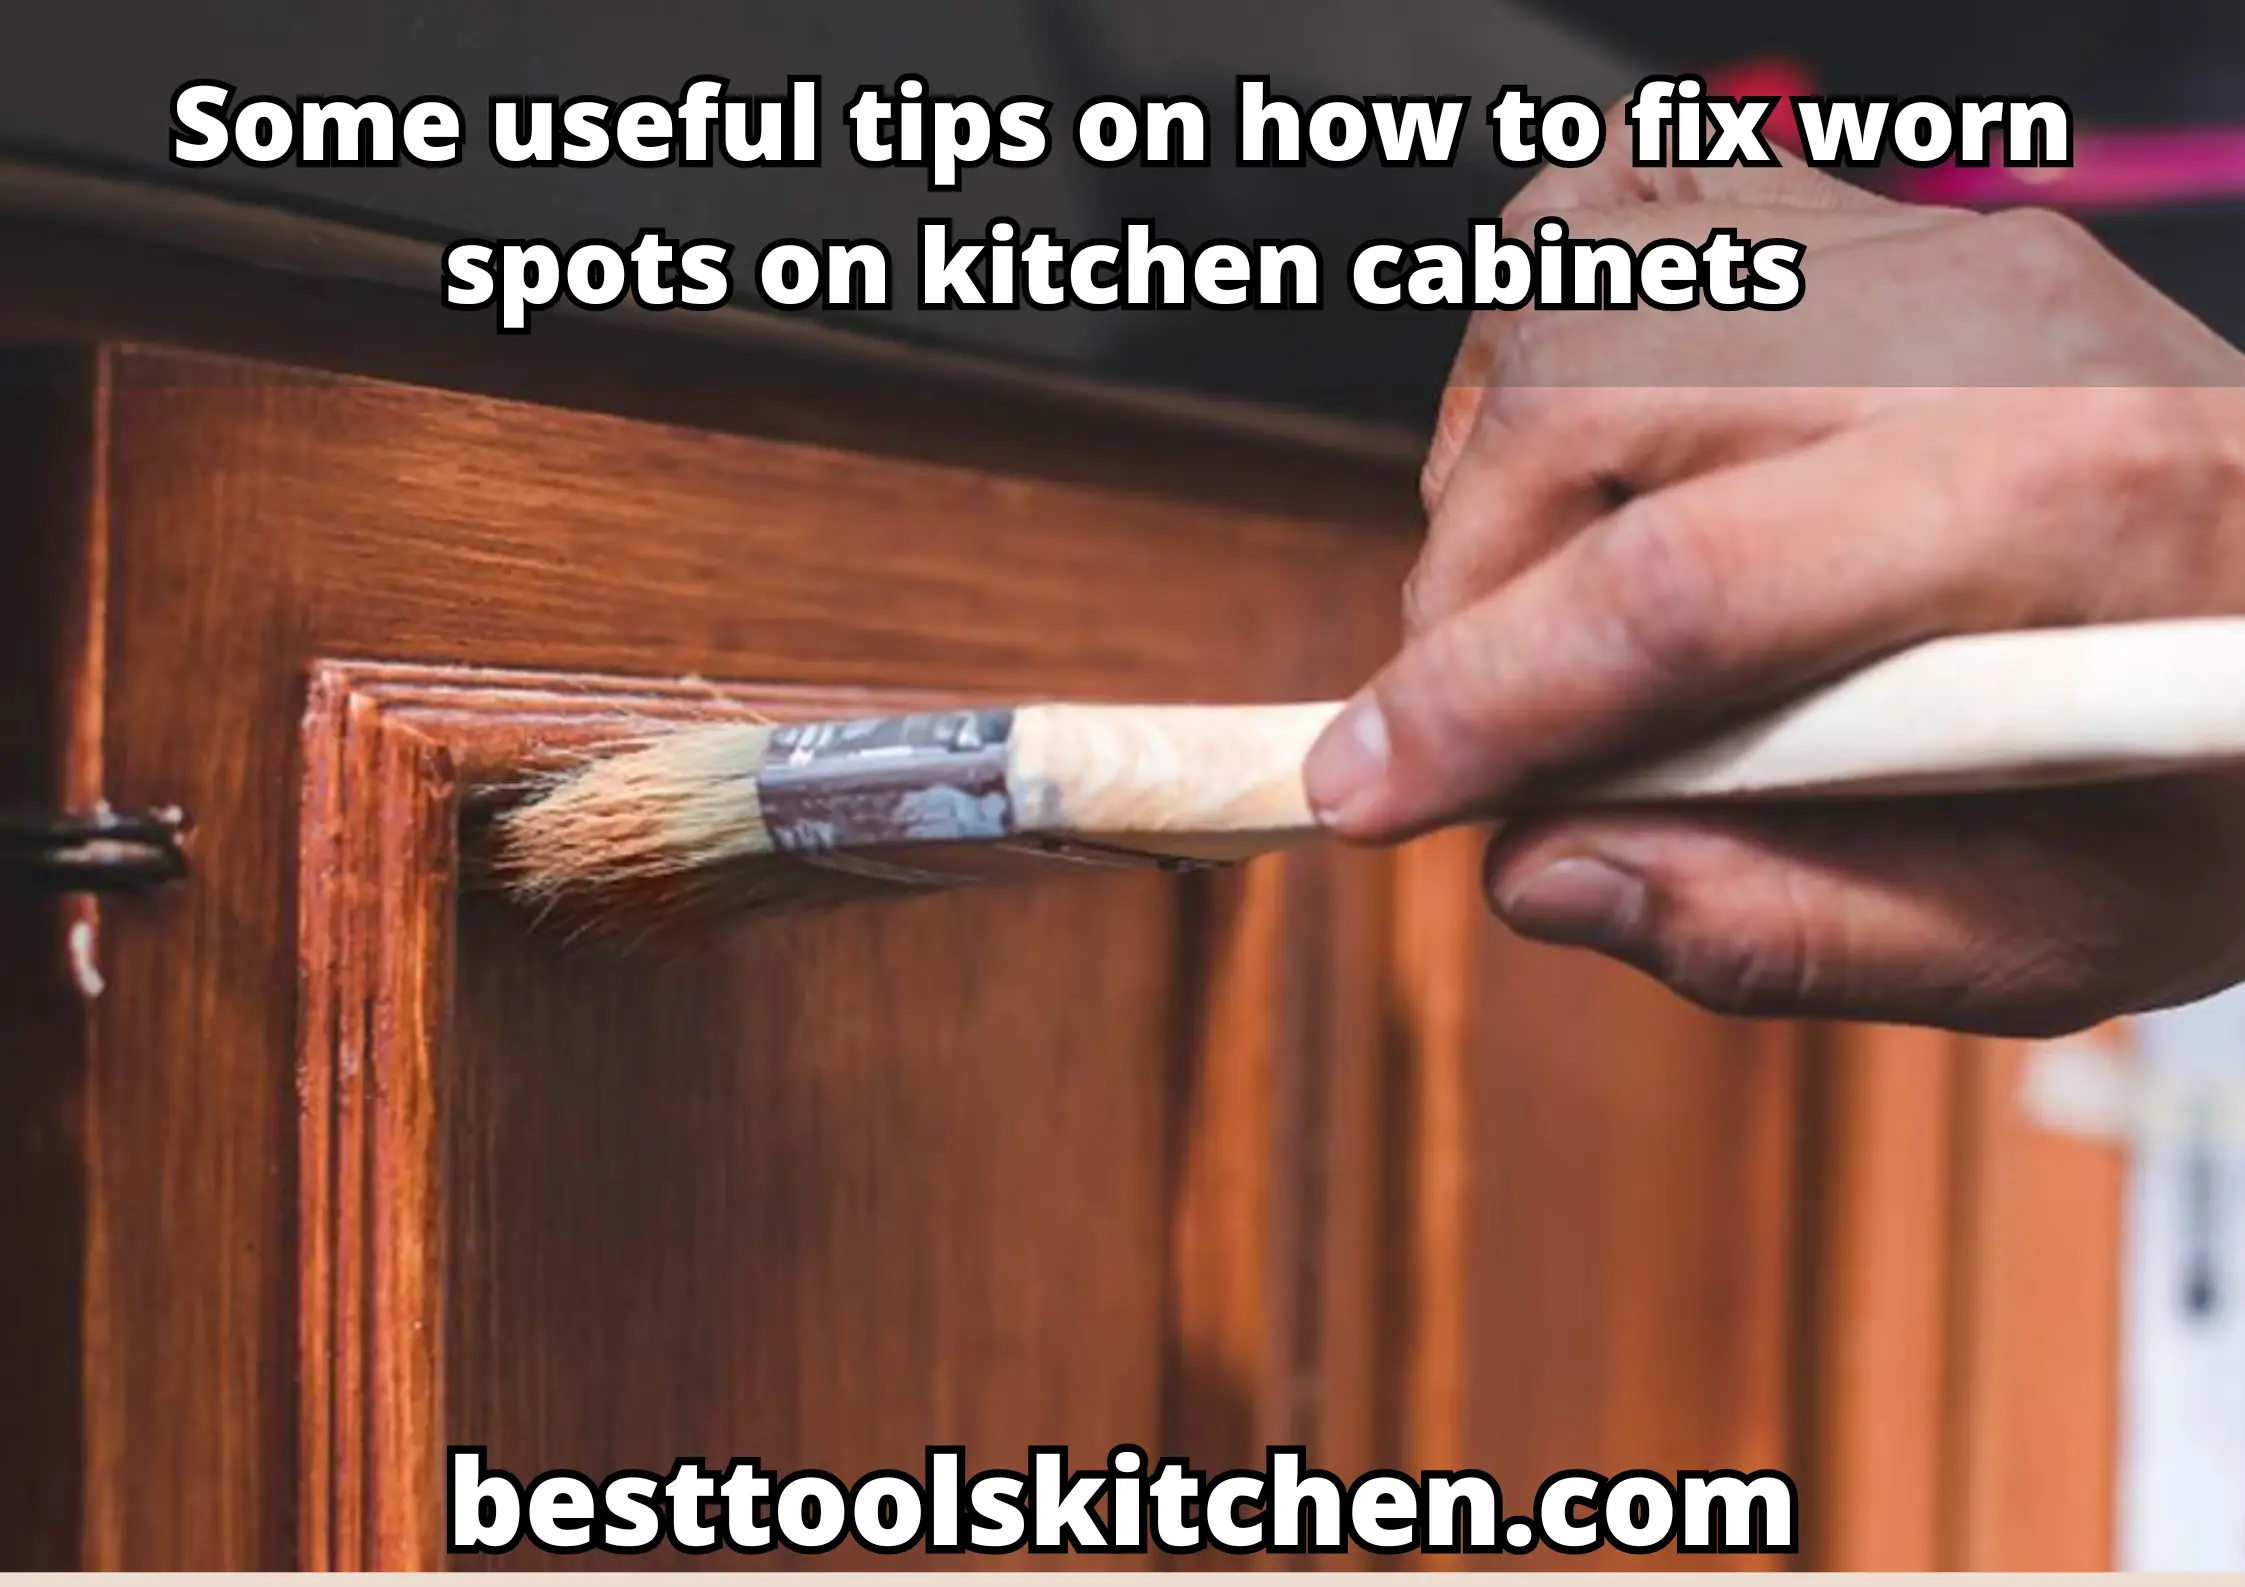 Some useful tips on how to fix worn spots on kitchen cabinets